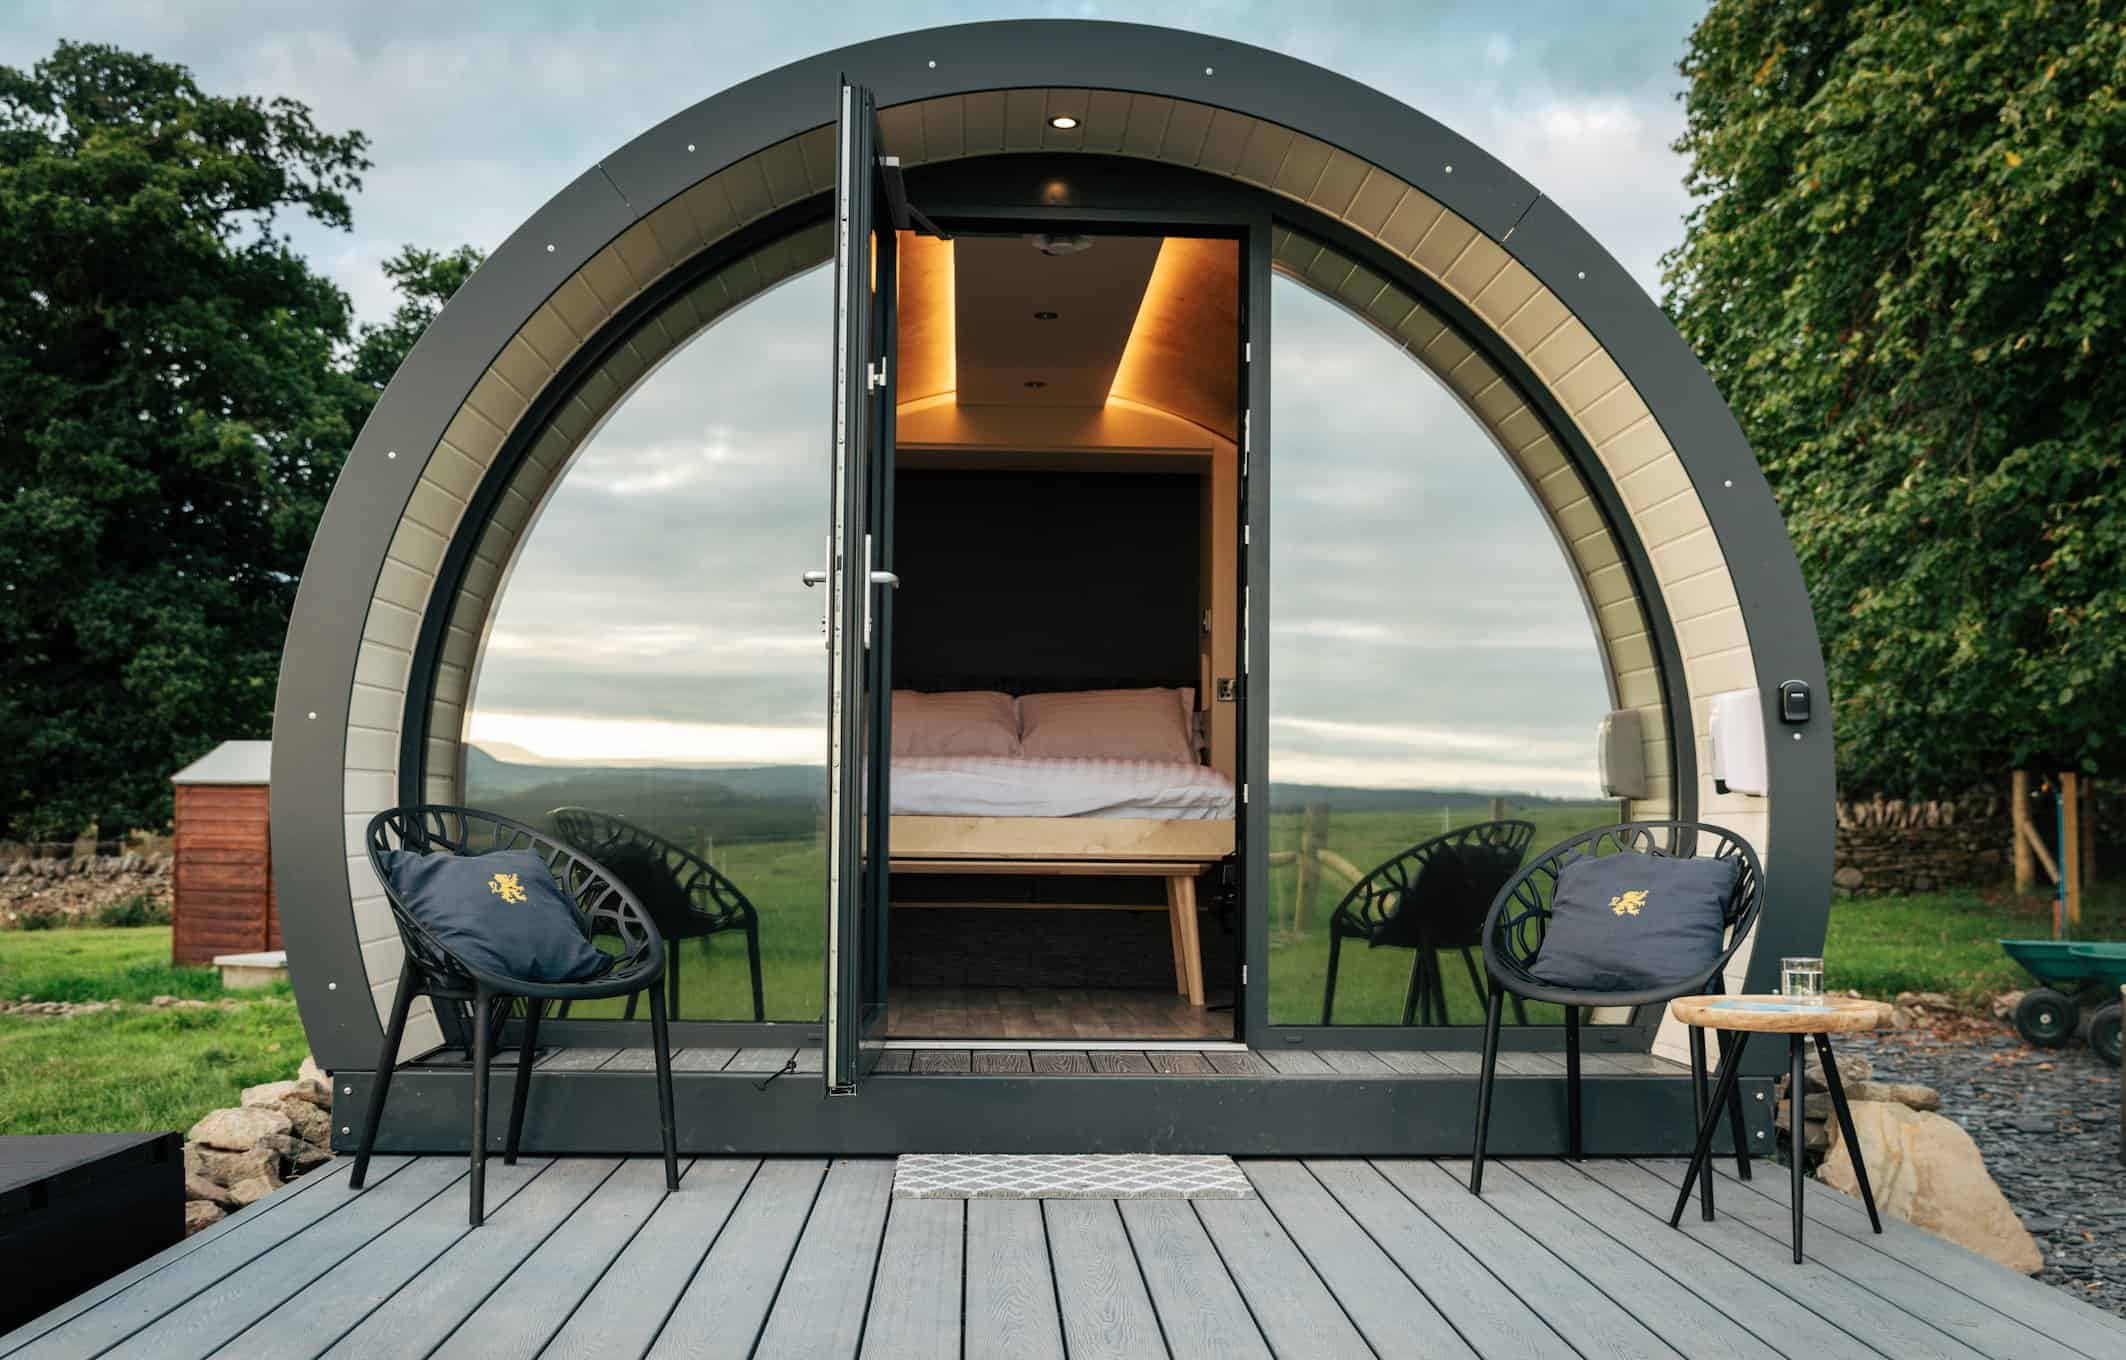 “The dedicatedly designed pod space is fantastic for two kids and two adults”